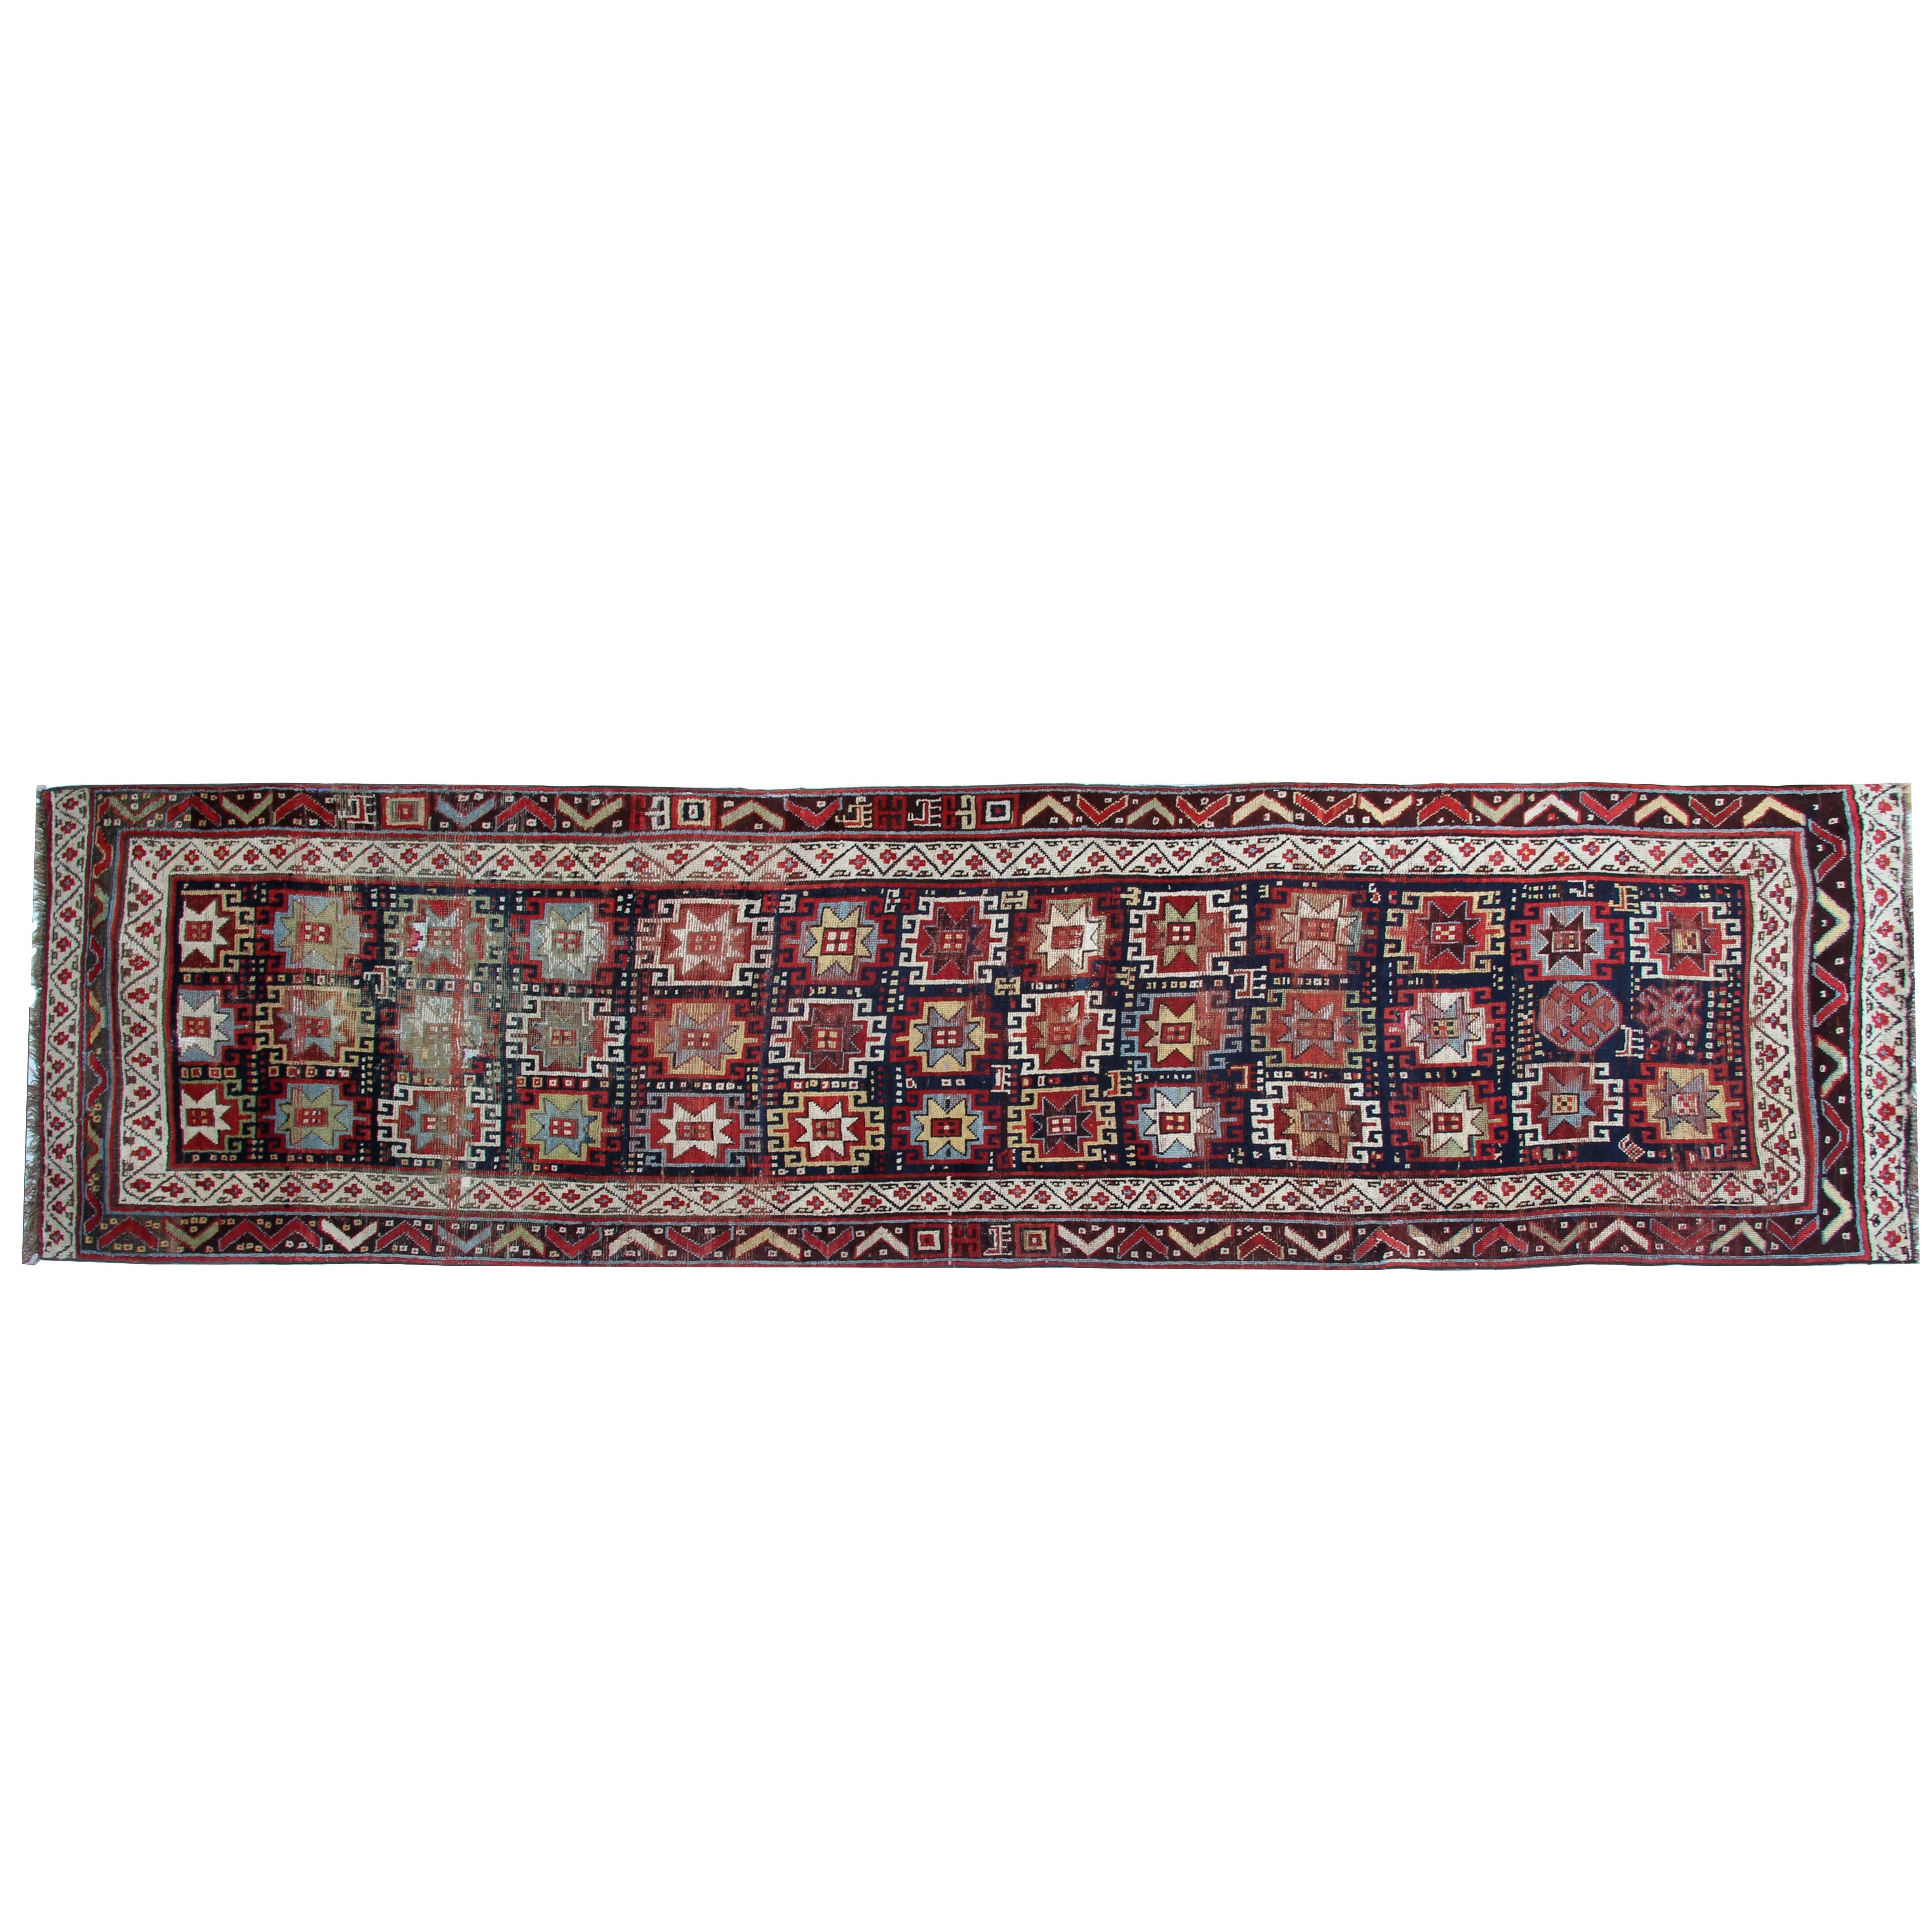 Antique Rugs, Traditional Rugs, Carpet Runners from Kurdistan 